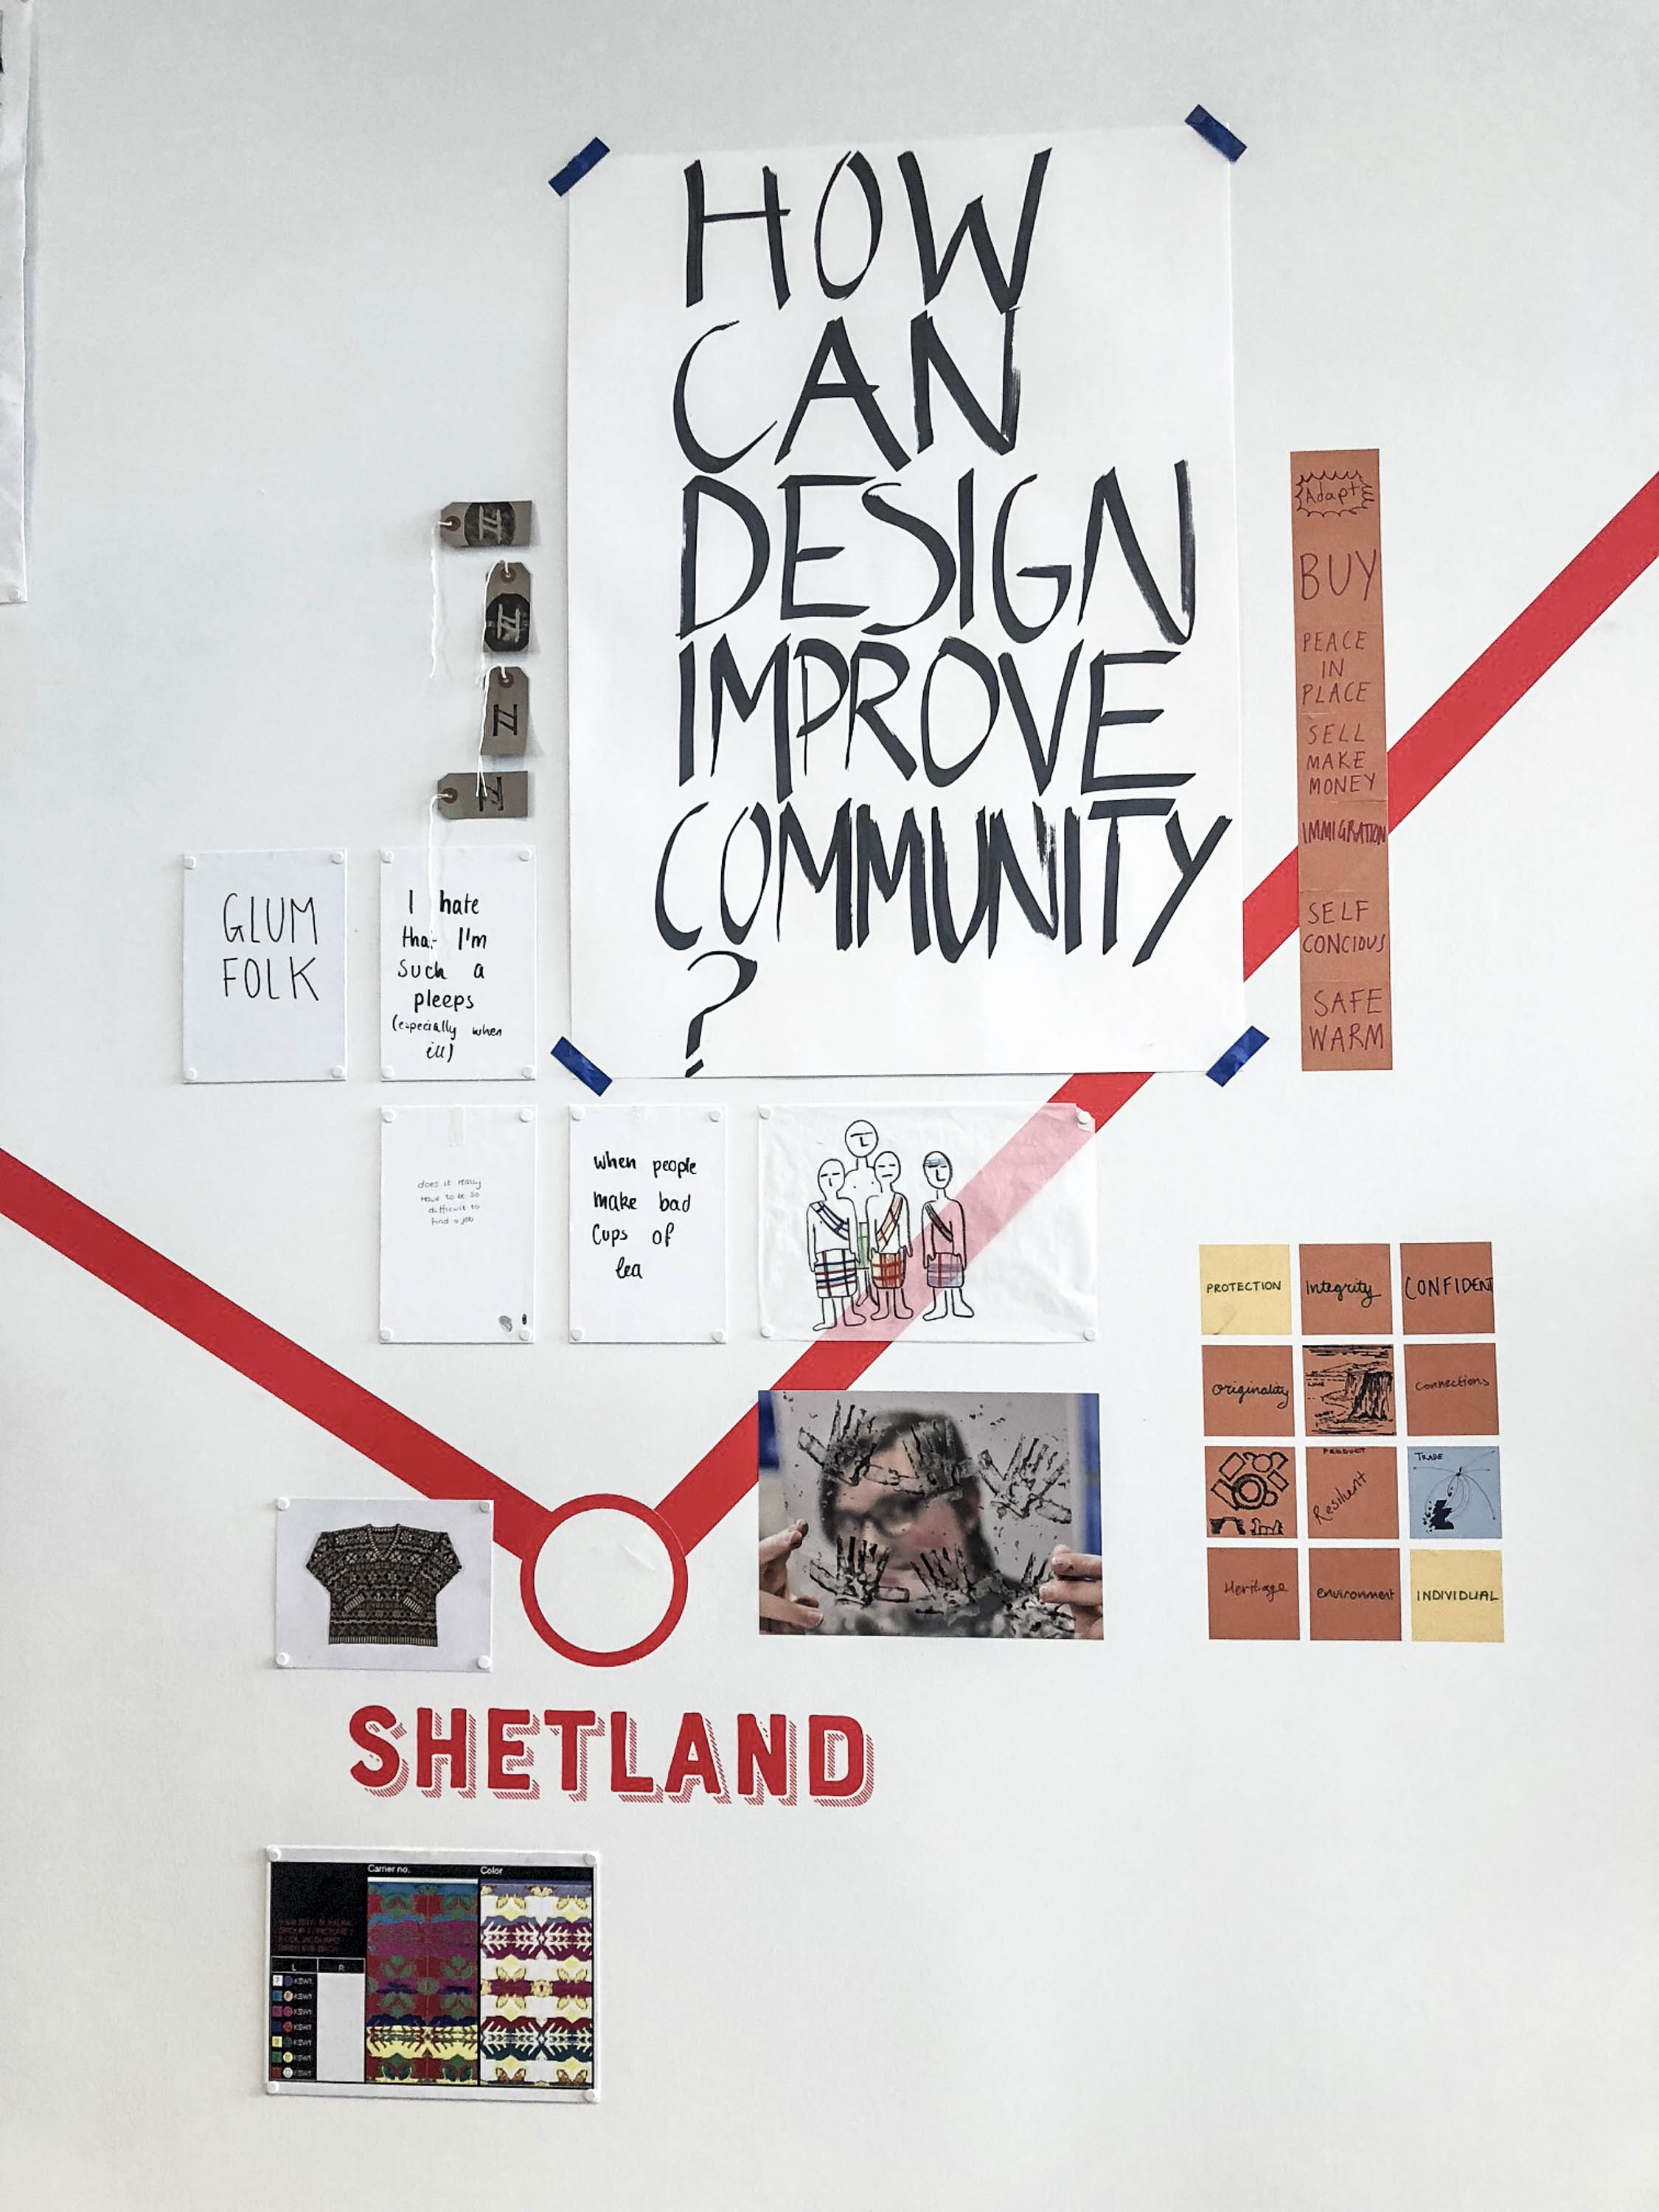 How can design improve community - shetland workshop materials on show at V&A dundee